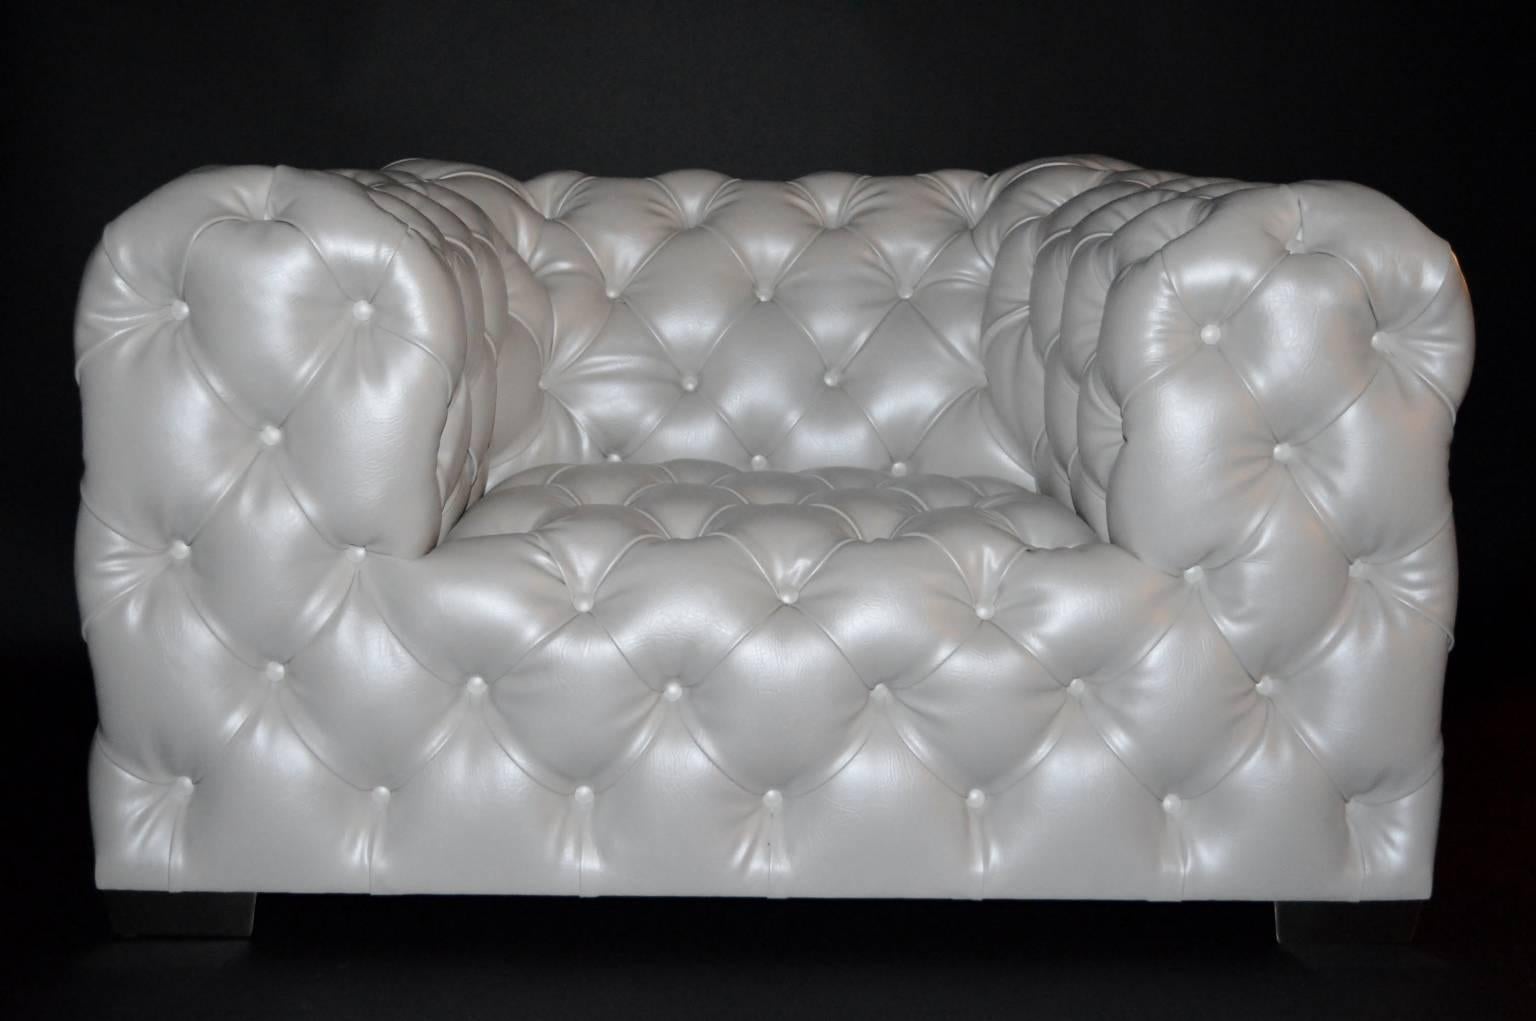 Pair of oversized tufted leather armchairs in a pearl white.